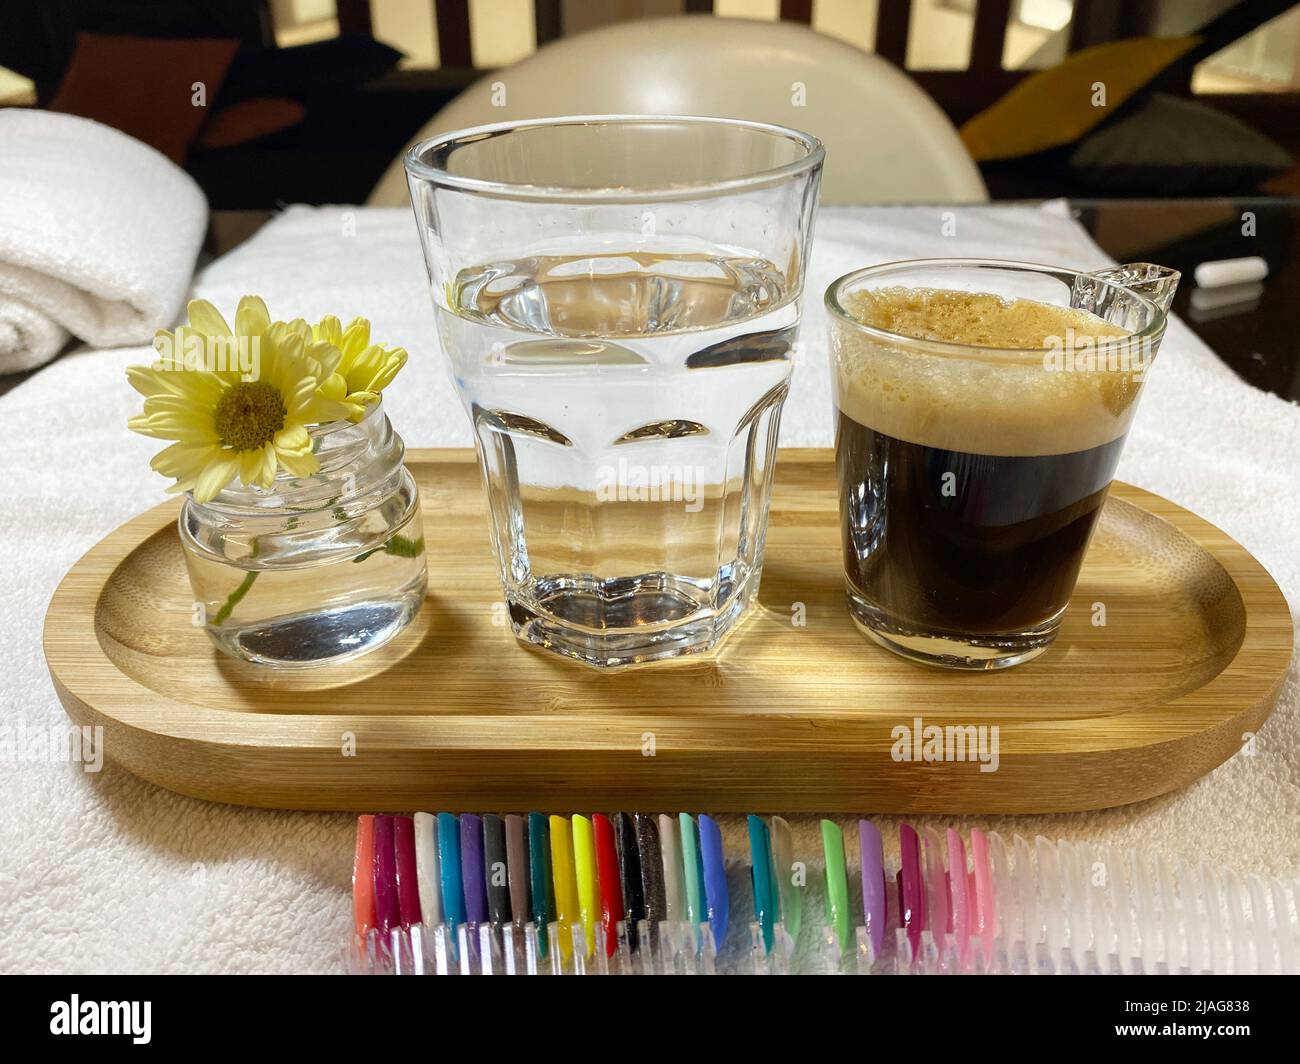 Coffee at the spa. Day to look beautiful with wonderful little things. Stock Photo